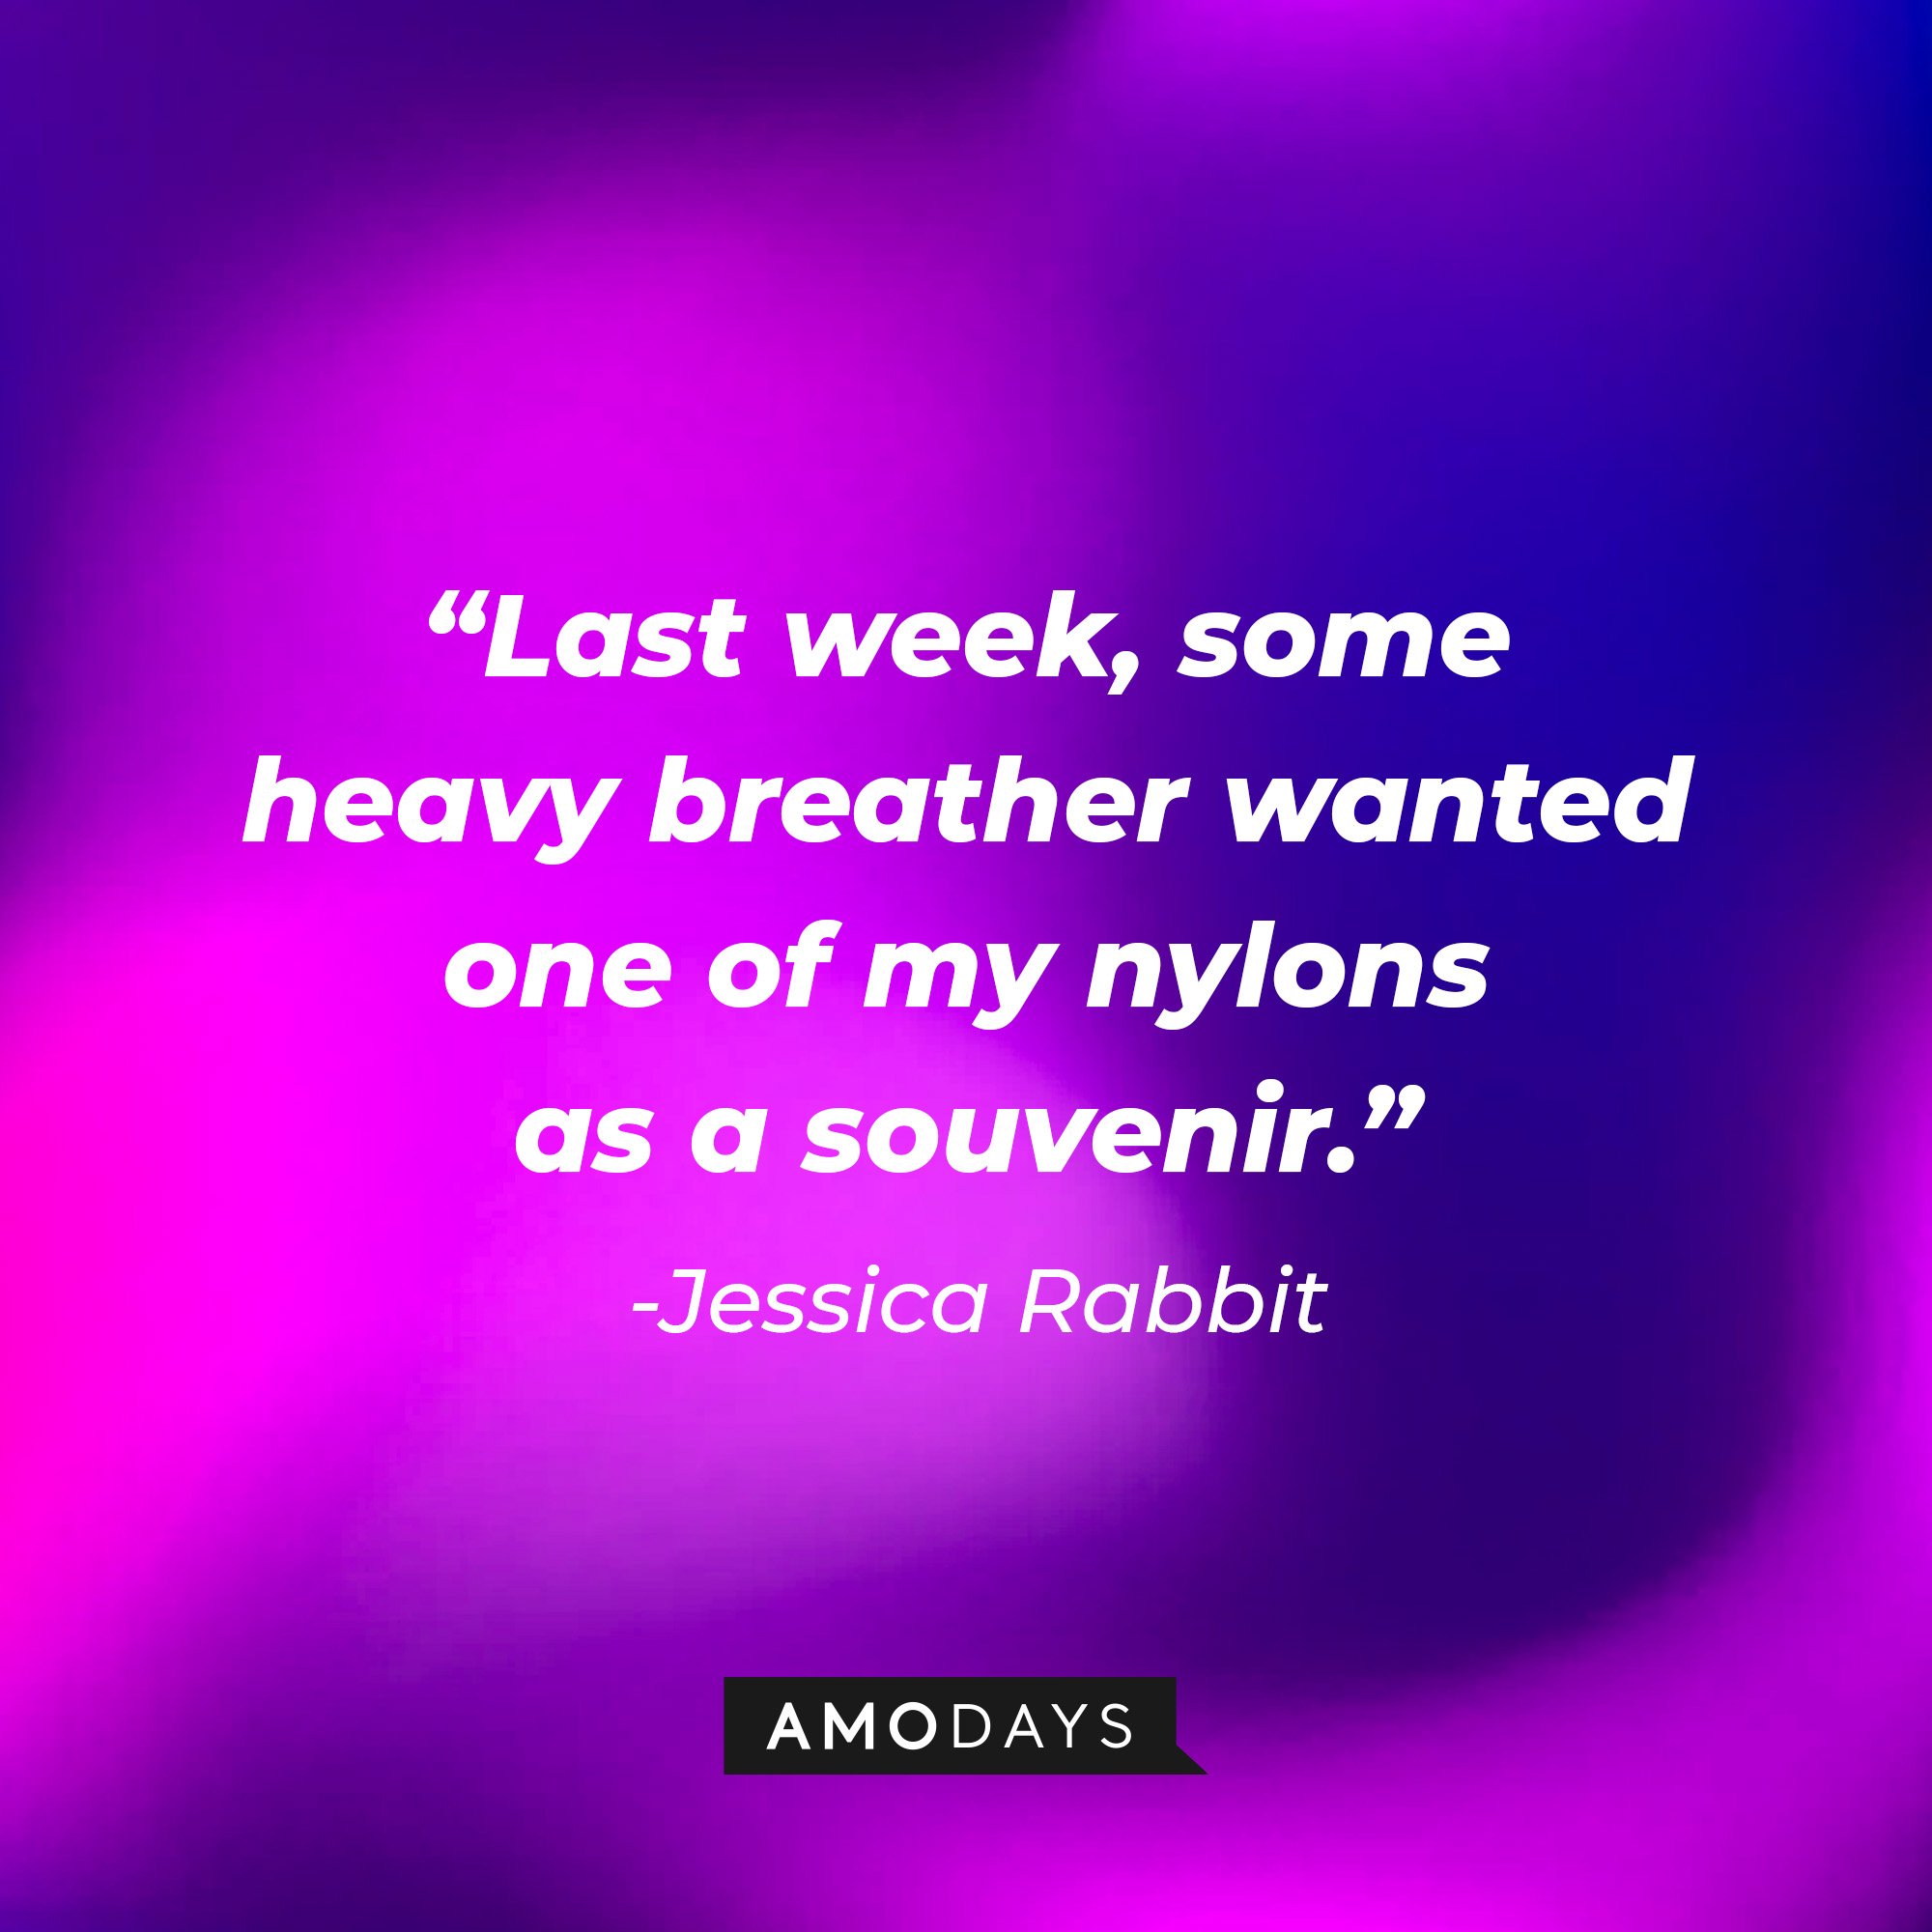  Jessica Rabbit’s quote: "Last week, some heavy breather wanted one of my nylons as a souvenir." | Image: AmoDays